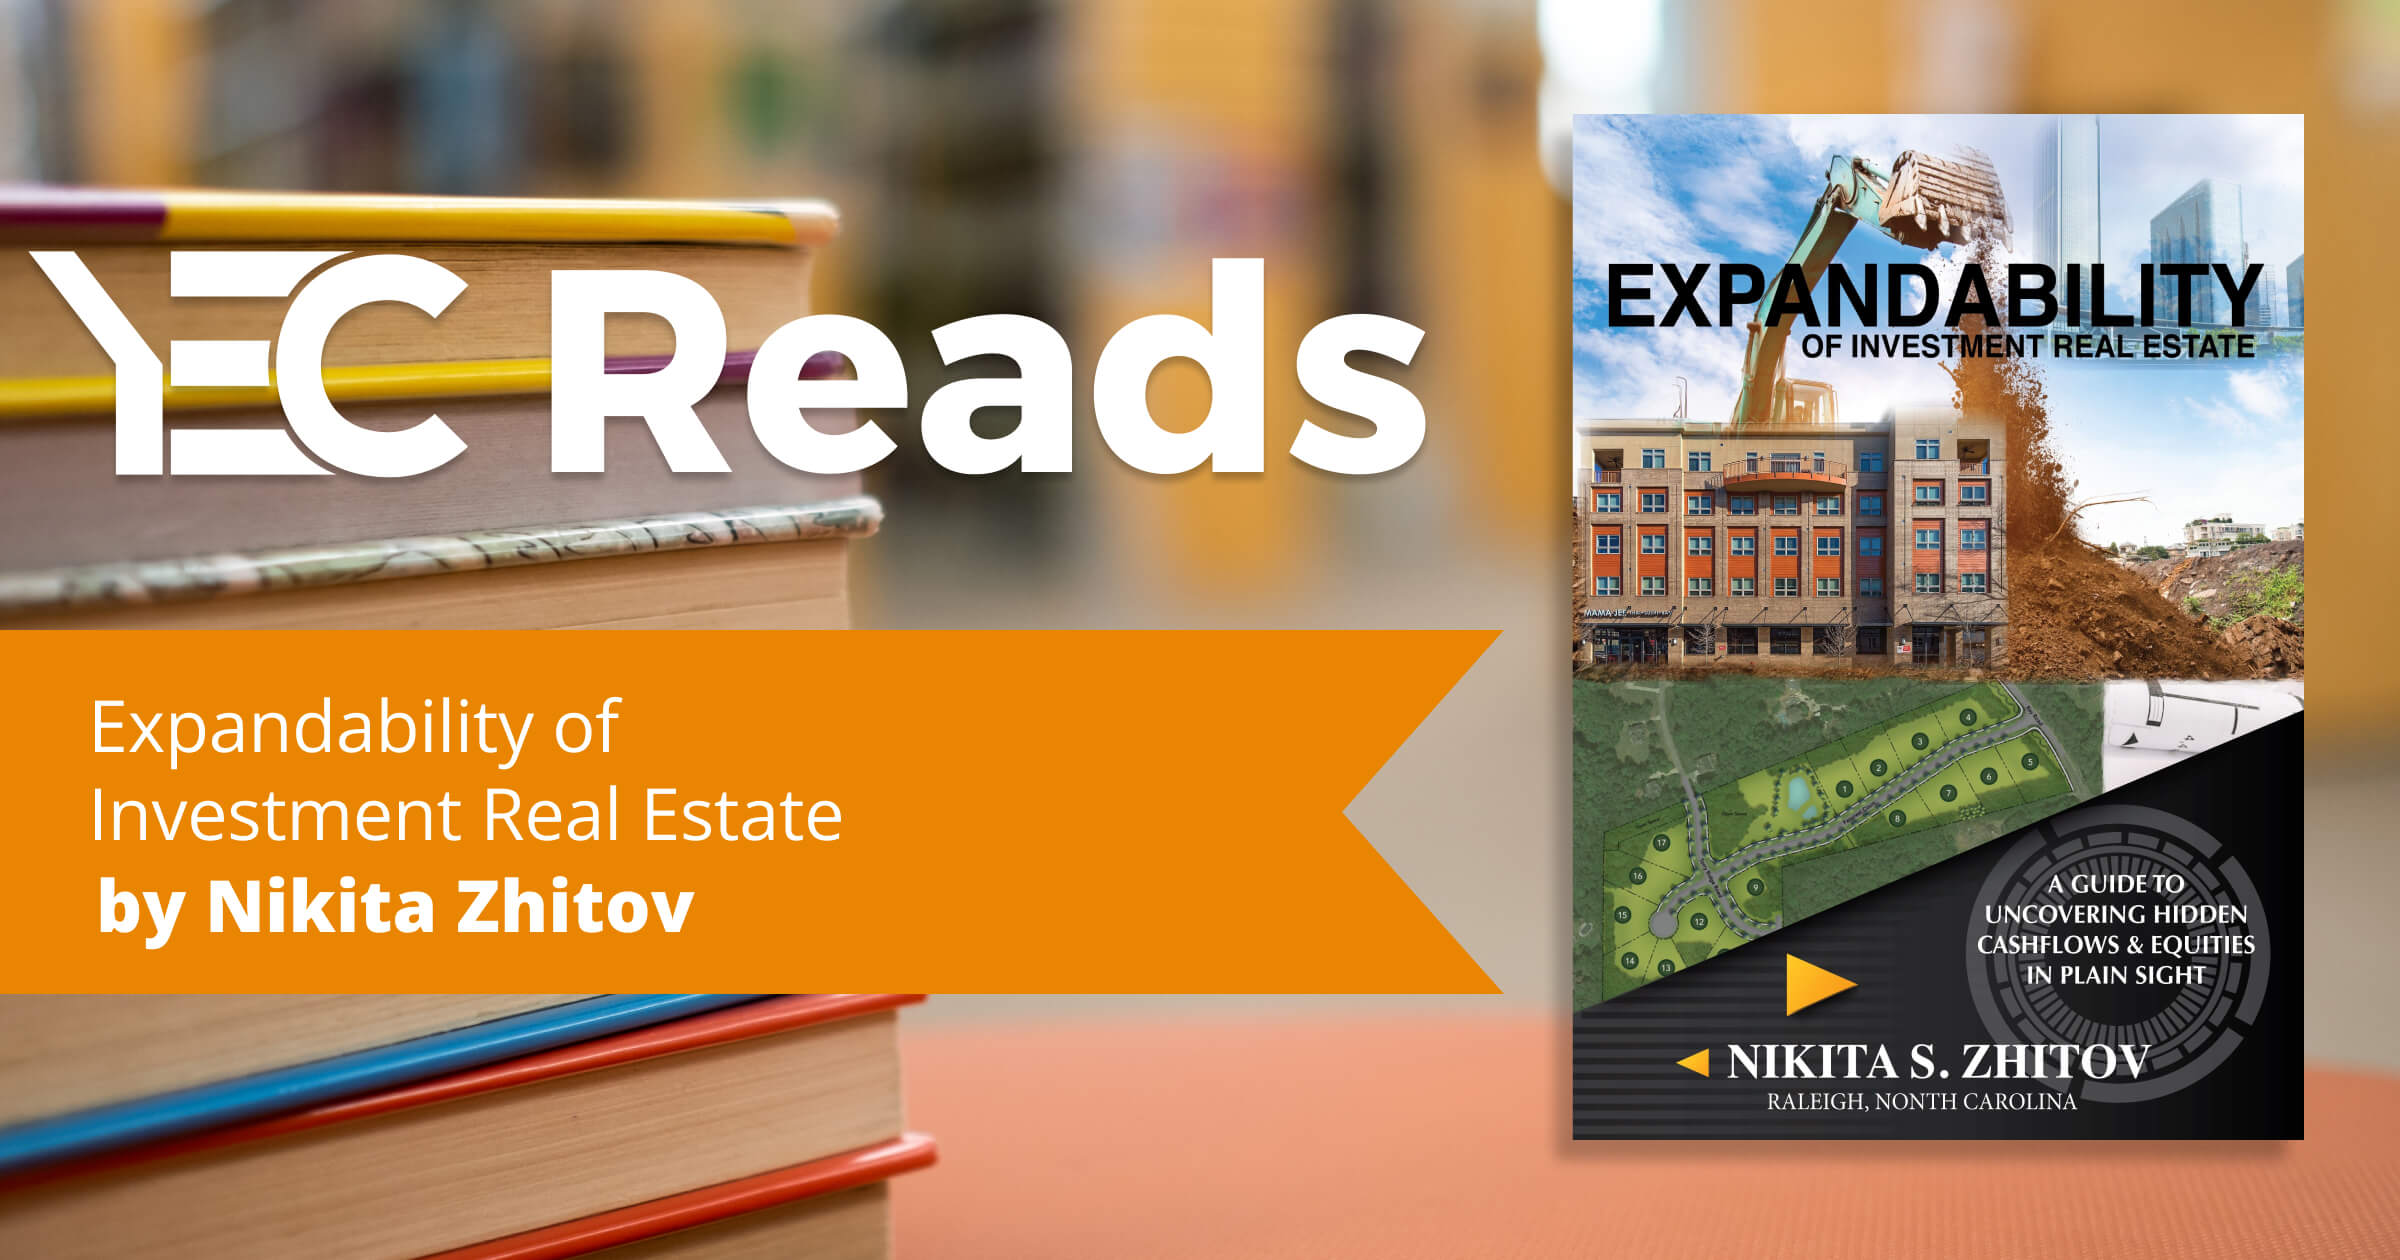 YEC Reads: Expandability of Investment Real Estate by Nikita Zhitov